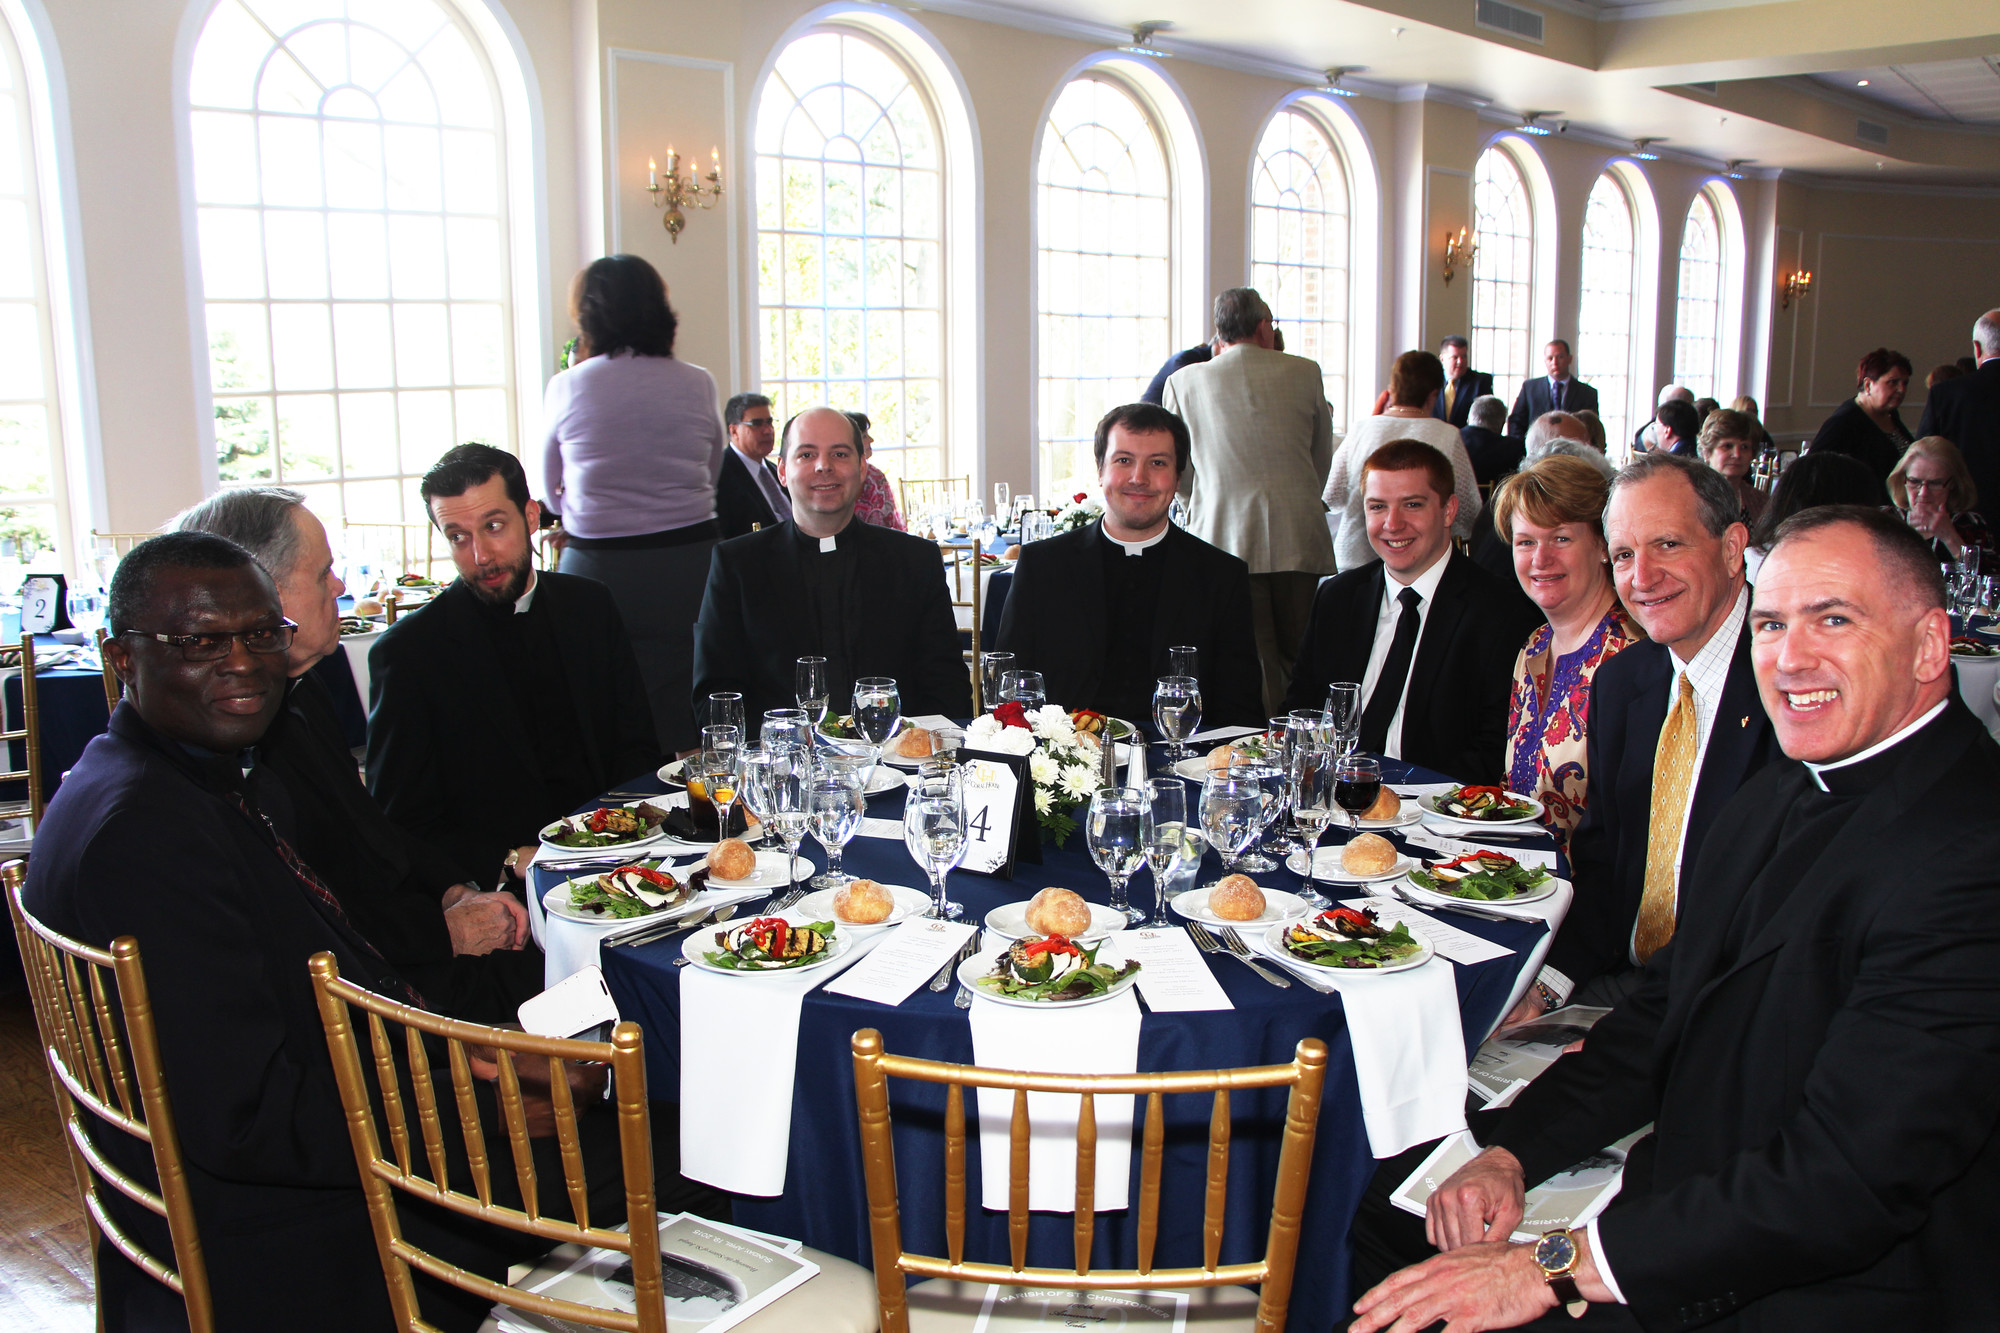 St. Christopher’s Parish hosted a gala at the Coral House in Baldwin last Saturday to celebrate its 100-year history.